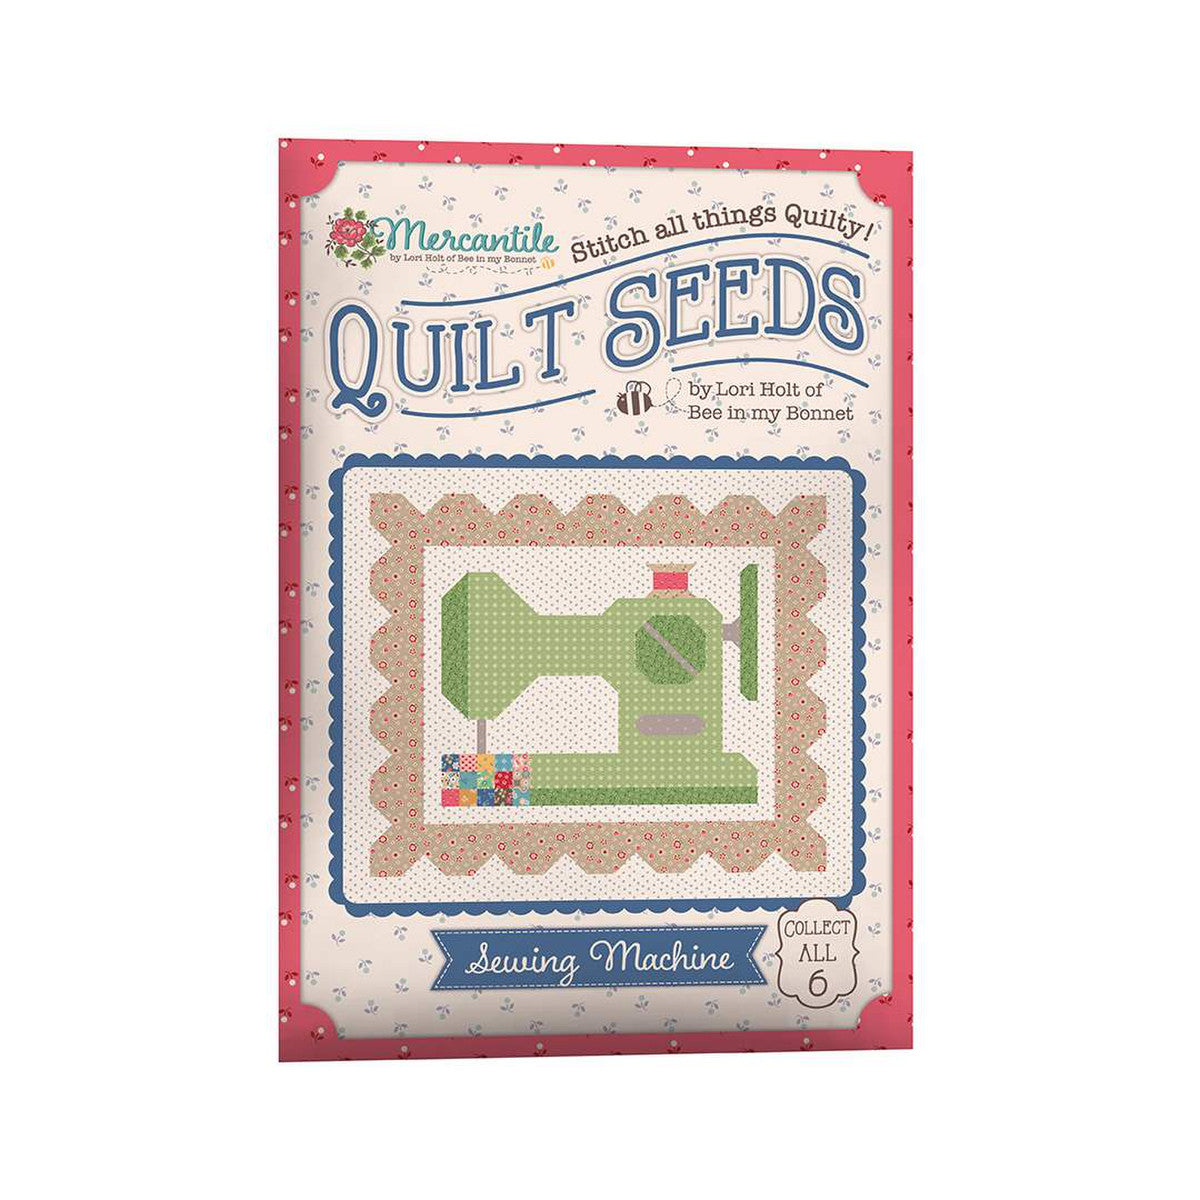 PATTERN, Mercantile Quilt Seeds ~ Sewing Machine Block by Lori Holt